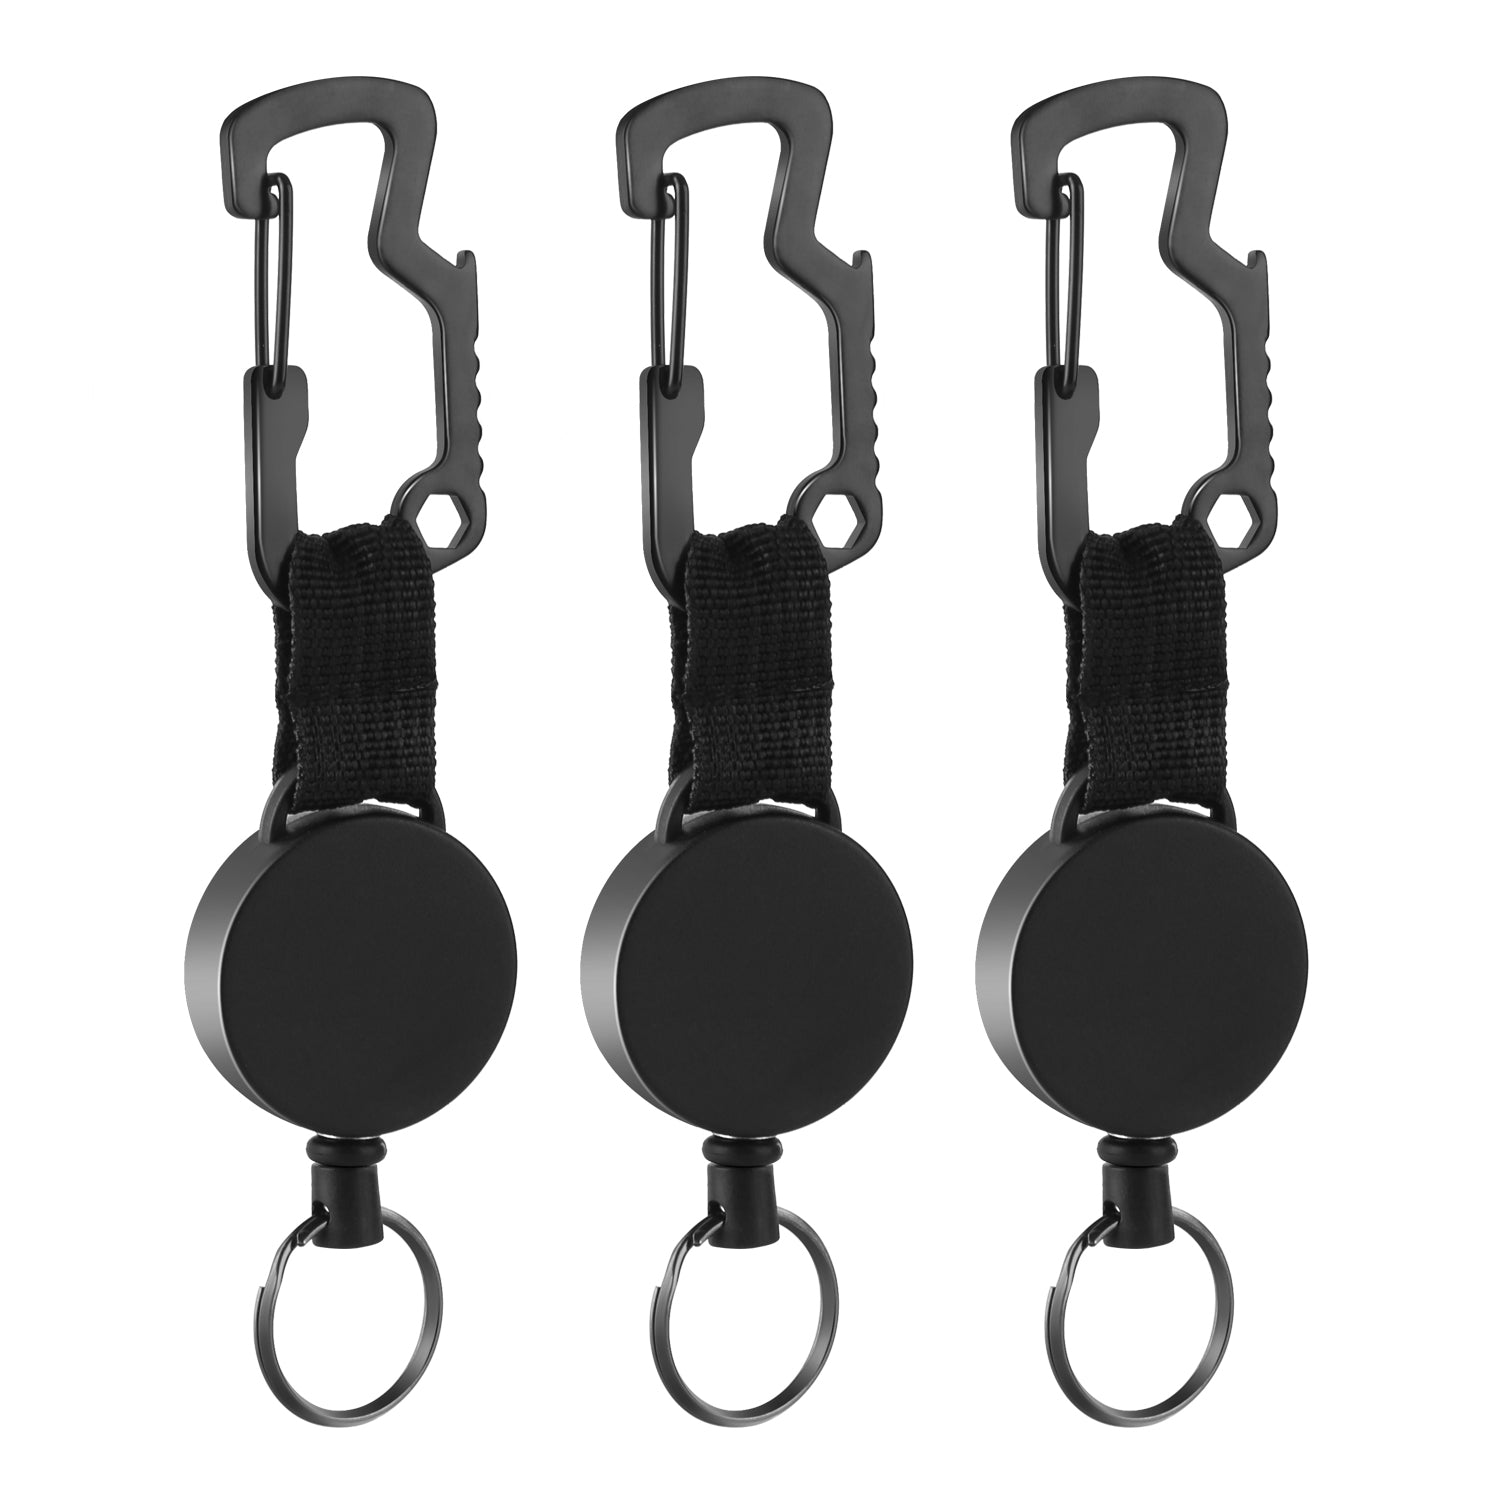 3 Pack Retractable Keychain - Heavy Duty Badge Holder Reel with Multitool  Carabiner Clip,Key Ring with Steel Wire Cord Up to 25 Inches,Black